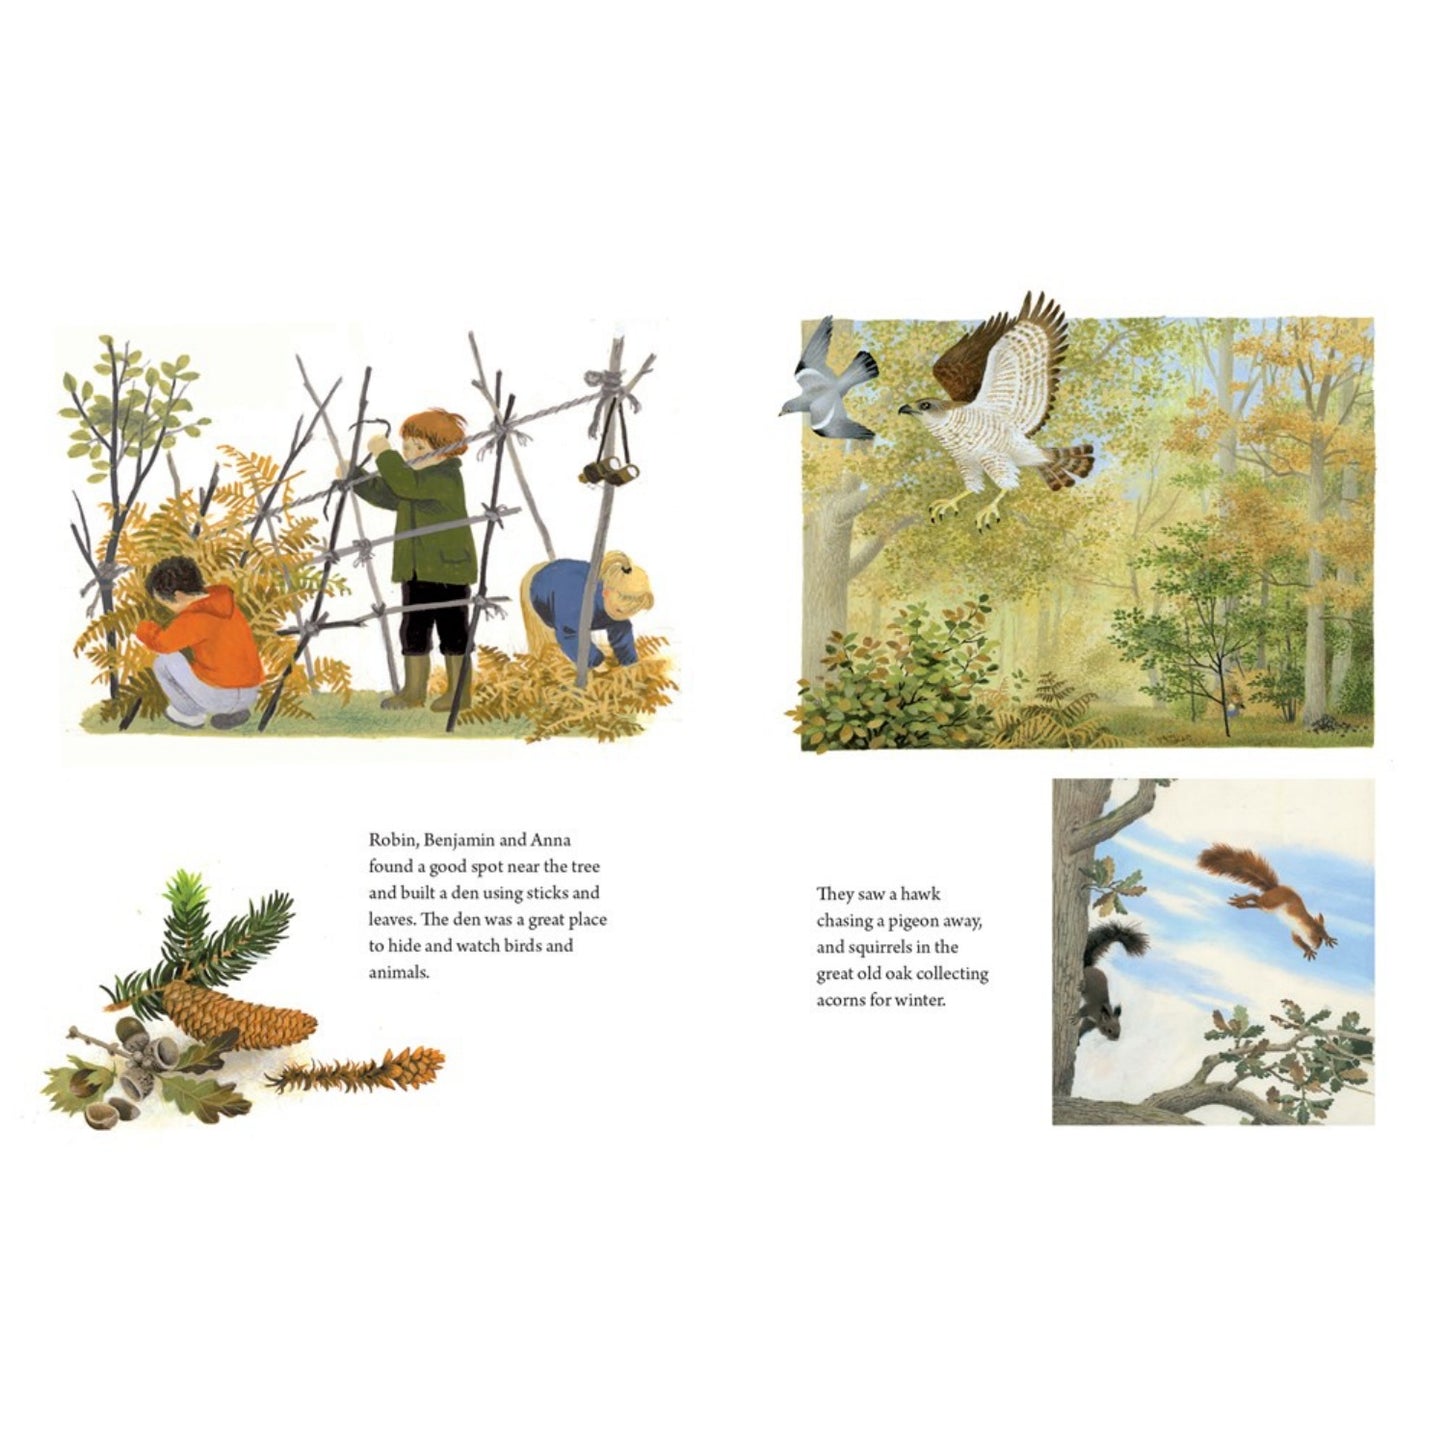 A Year Around the Great Oak | Gerda Muller | Hardcover | Children’s Book on Nature